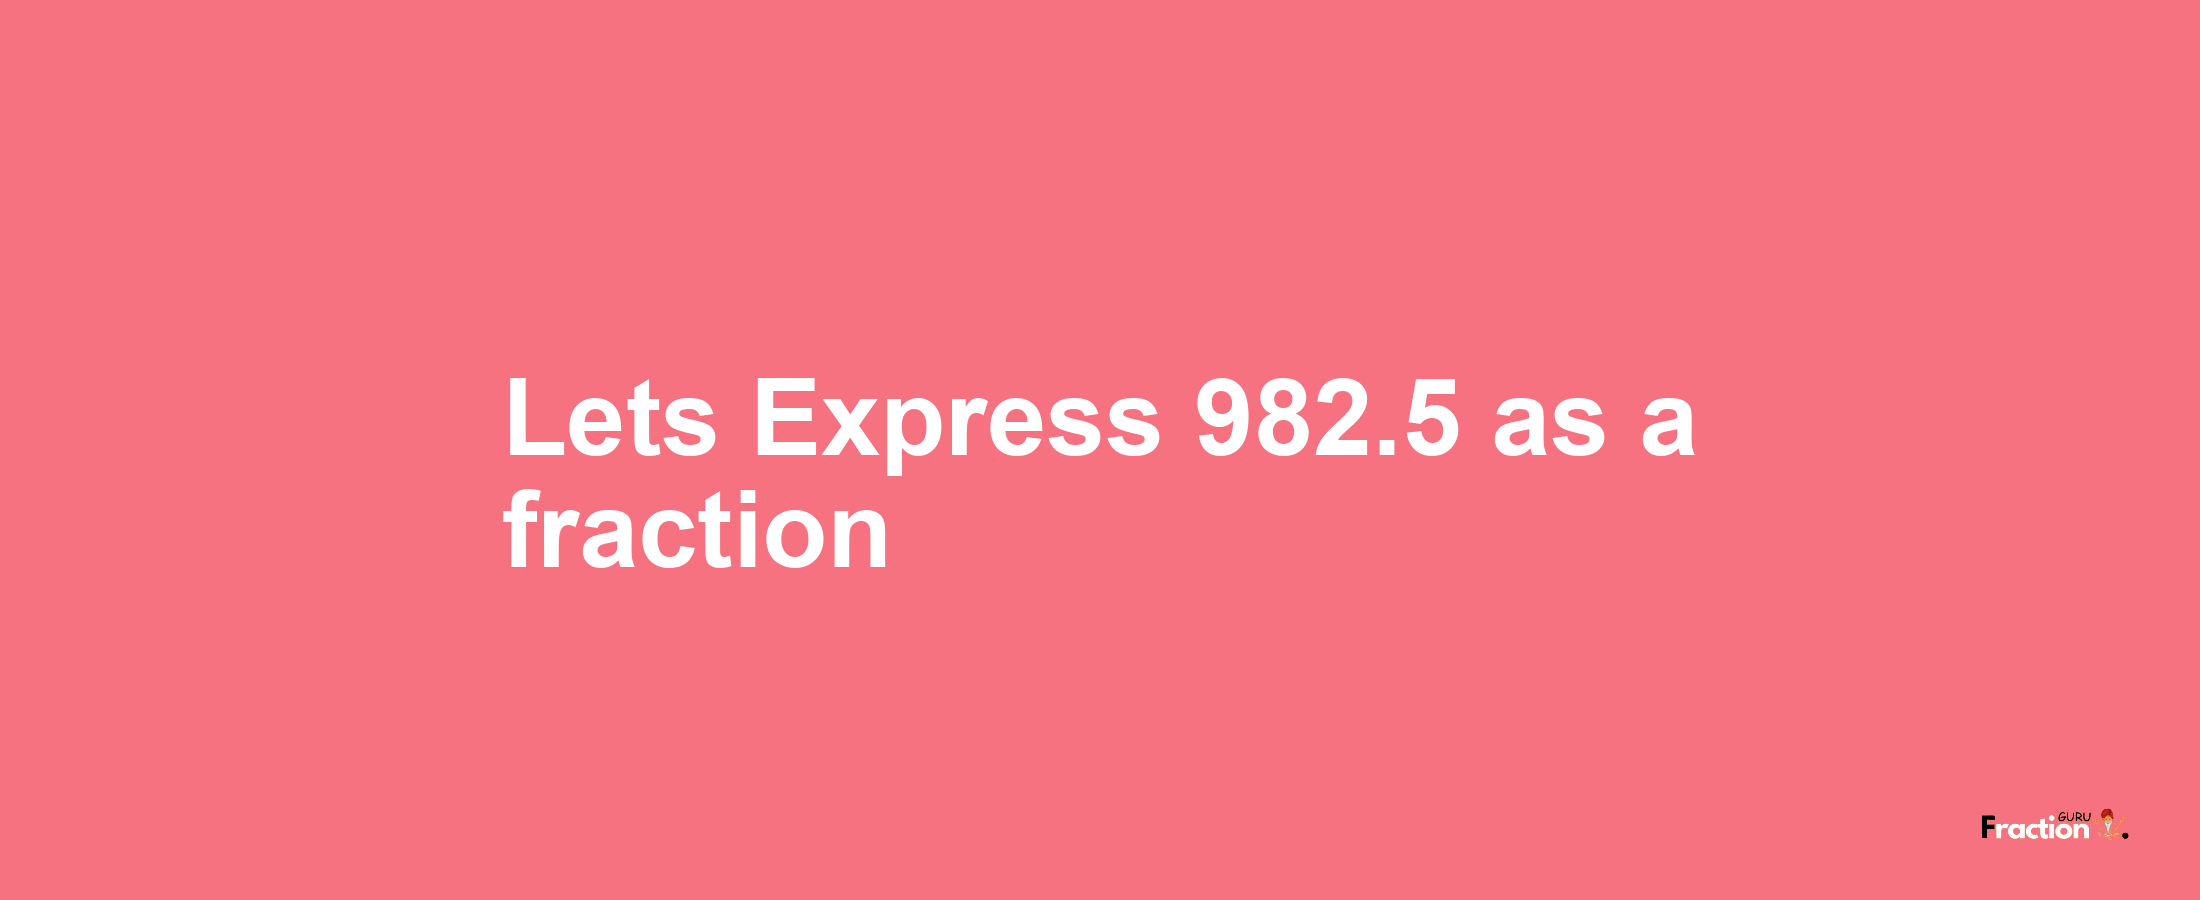 Lets Express 982.5 as afraction